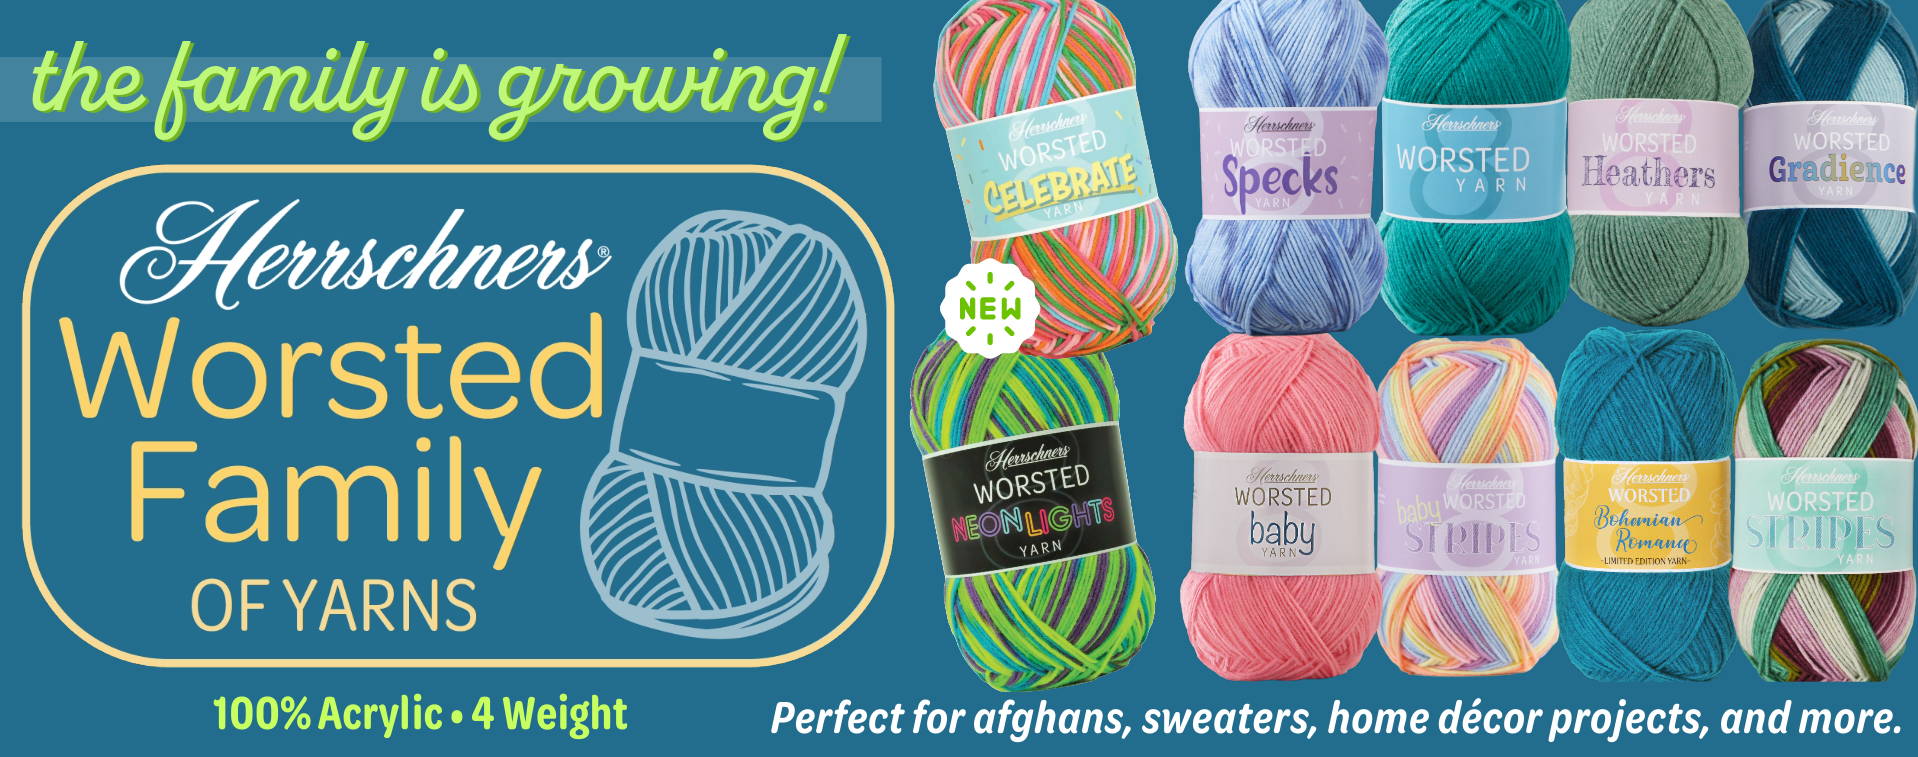 Herrschners Worsted Family of Yarns. Perfect for afghans, home decor, and more. Explore Now.